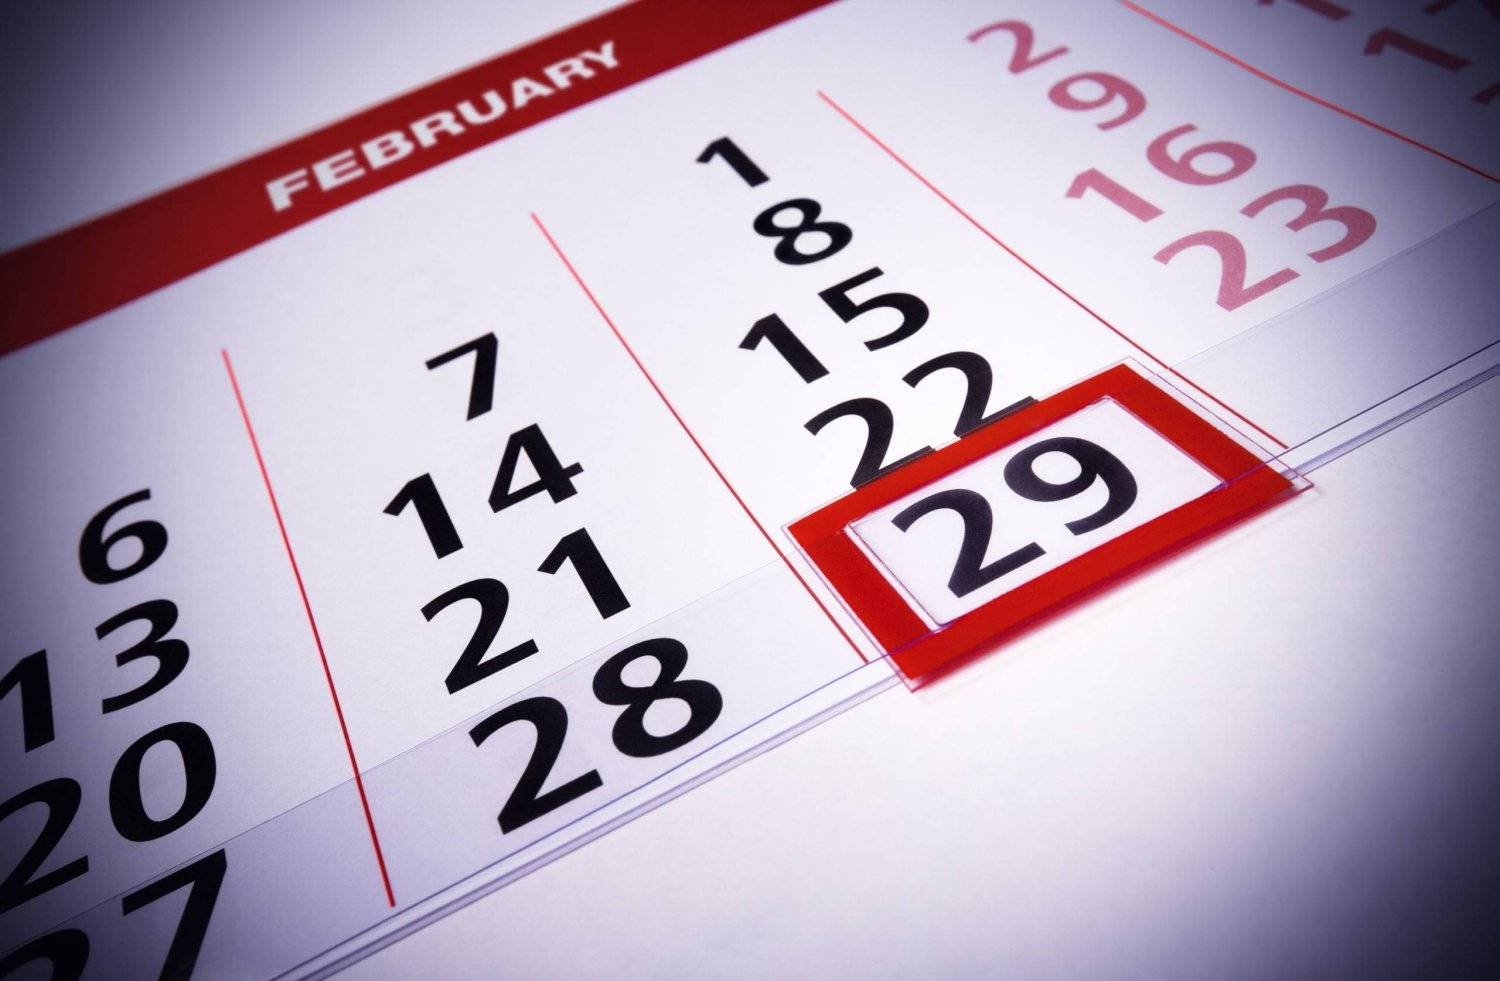 In a leap year, we add this extra day to the month of February, making it 29 days long instead of the usual 28